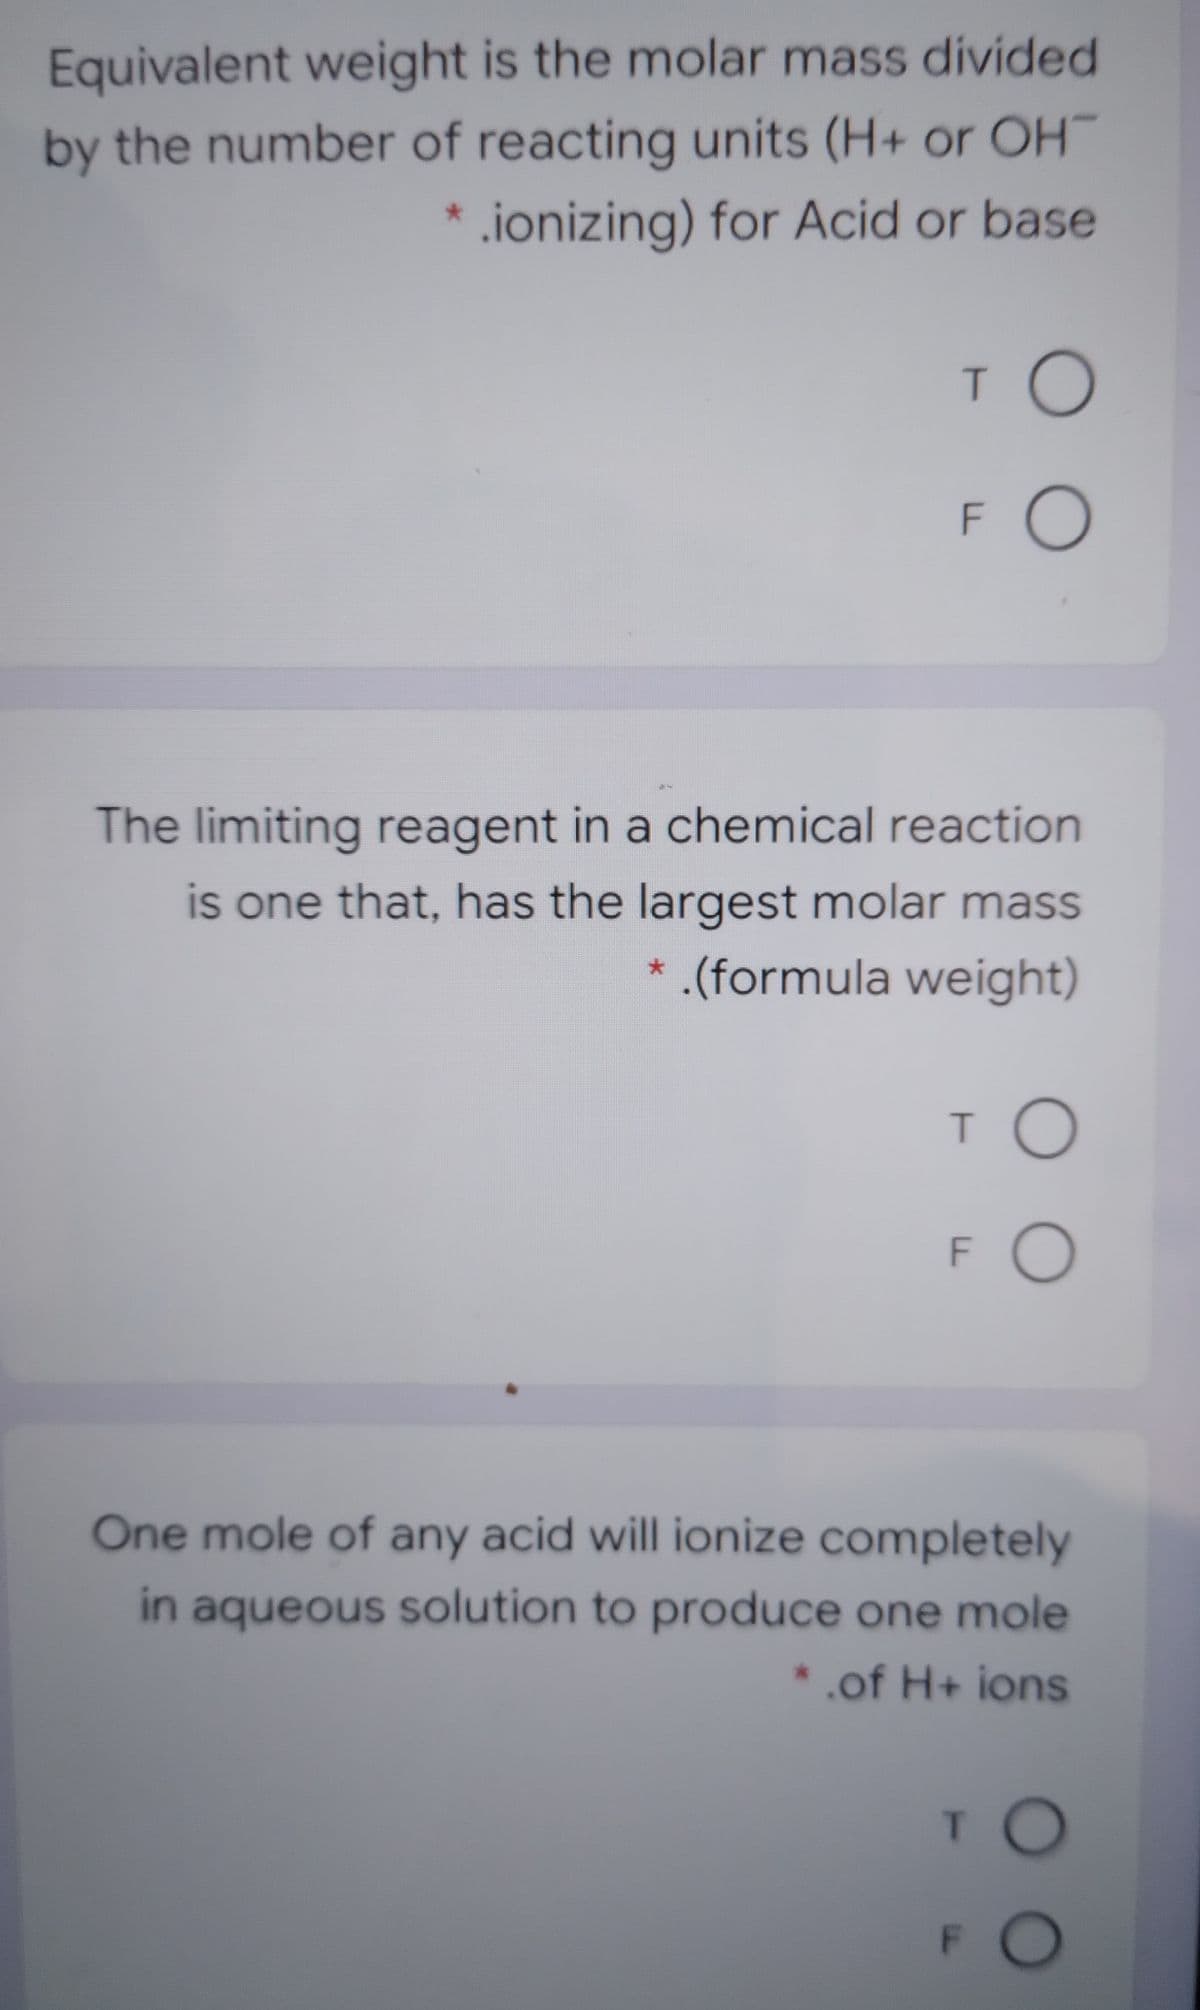 Equivalent weight is the molar mass divided
by the number of reacting units (H+ or OH
.ionizing) for Acid or base
TO
FO
The limiting reagent in a chemical reaction
is one that, has the largest molar mass
* (formula weight)
FO
One mole of any acid will ionize completely
in aqueous solution to produce one mole
* .of H+ ions
TO
FO
